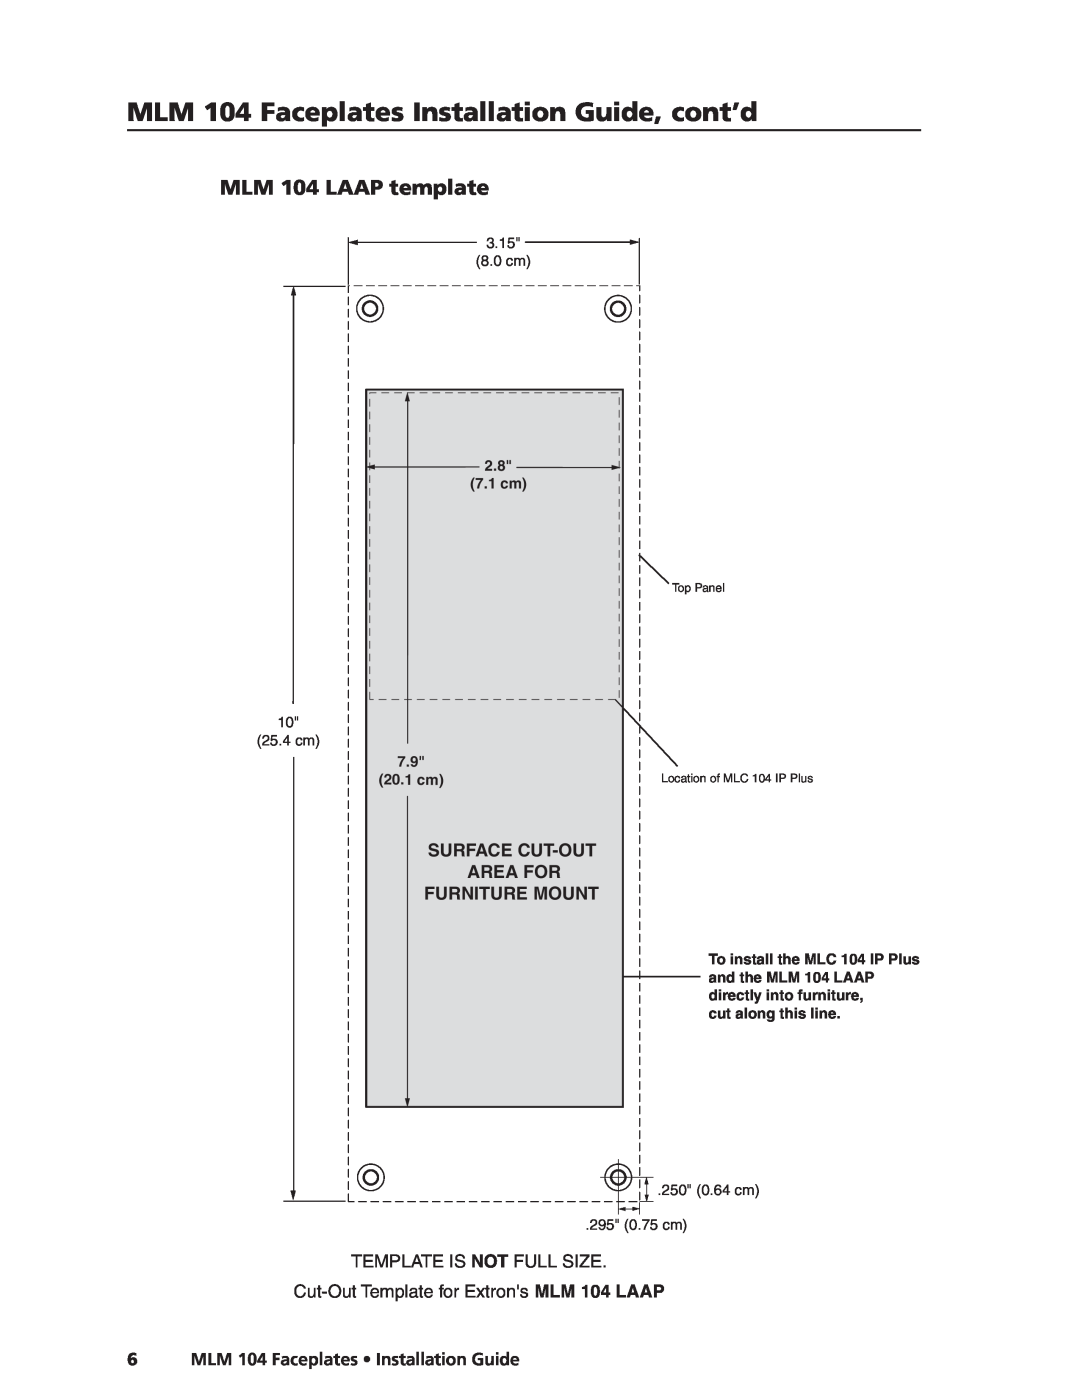 Extron electronic MLM 104 2GWP MLM 104 LAAP template, Surface Cut-Out Area For Furniture Mount, 3.15 8.0 cm, 2.8 7.1 cm 